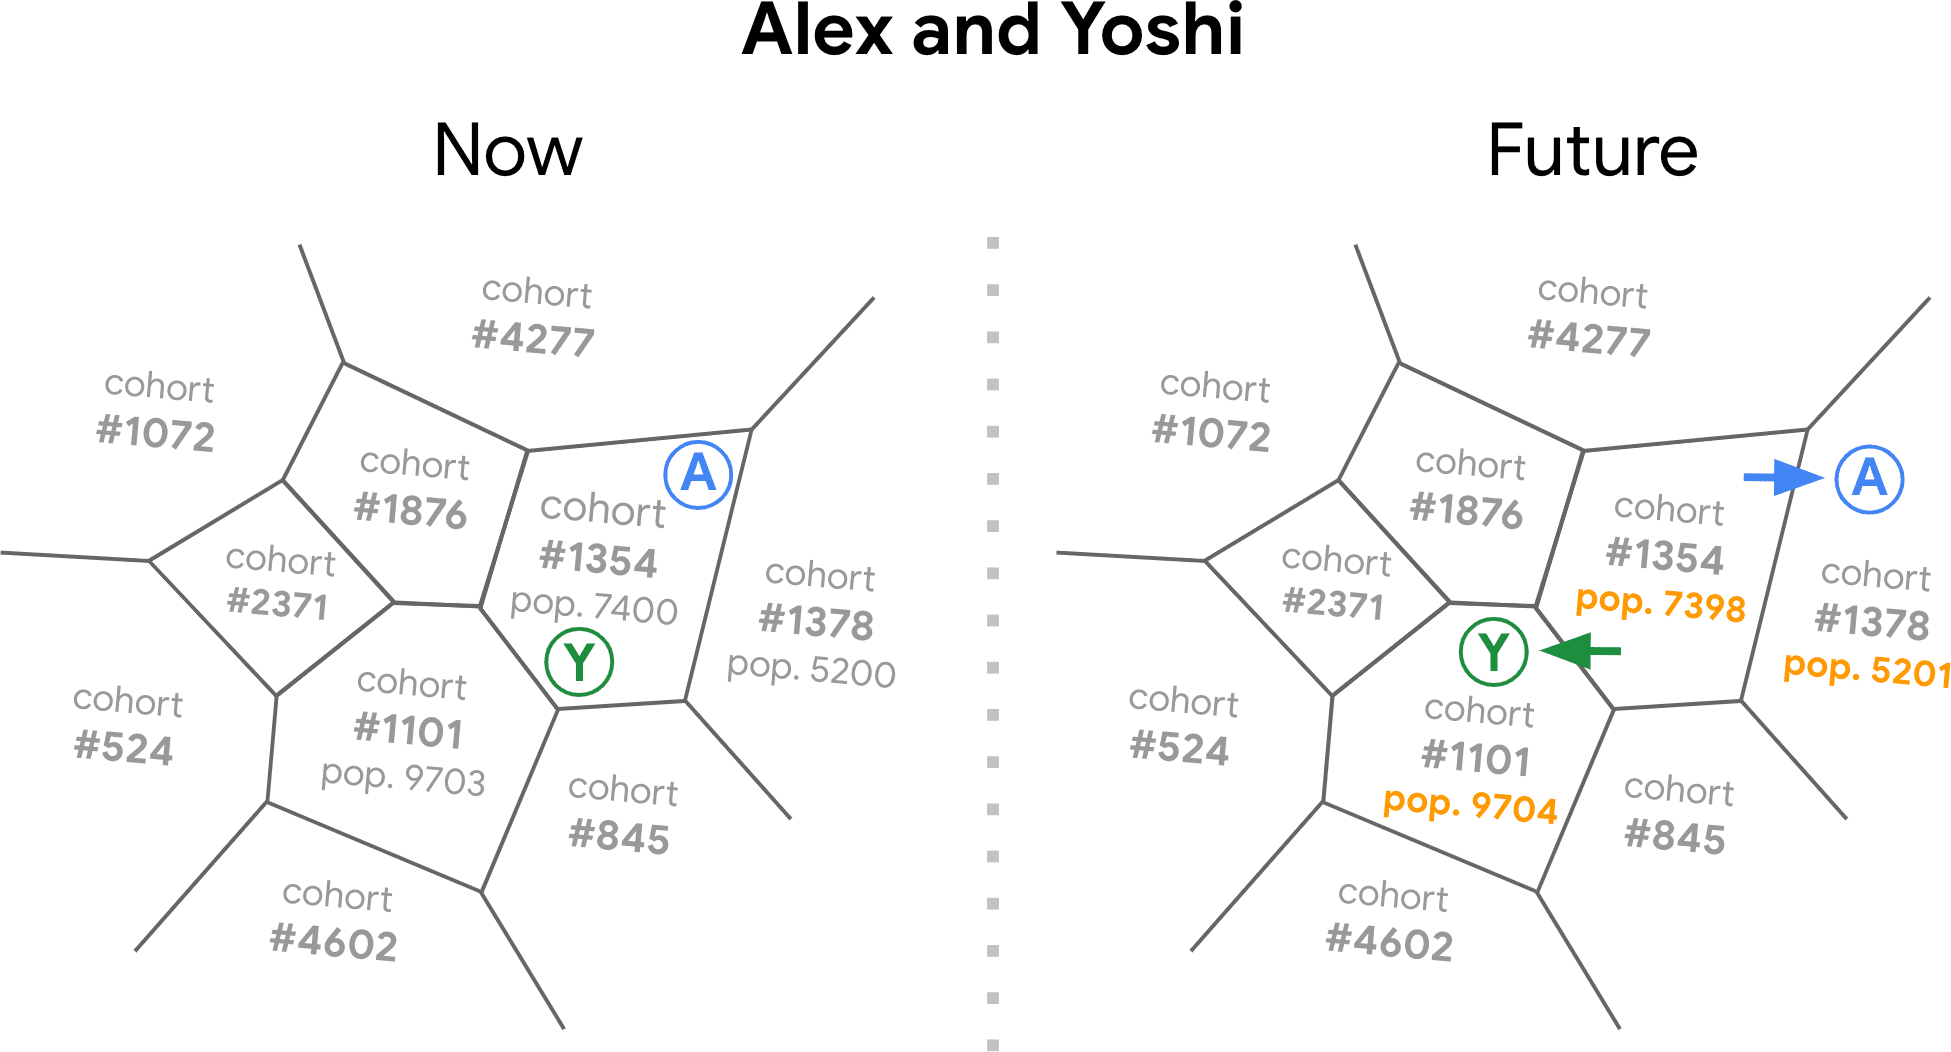 Diagram of the
'browsing history space' created by a FLoC server, showing multiple segments, each with a cohort
number. The diagram shows browsers belonging to users Yoshi and Alex moving from one cohort to
another as their browsing interests change over time.